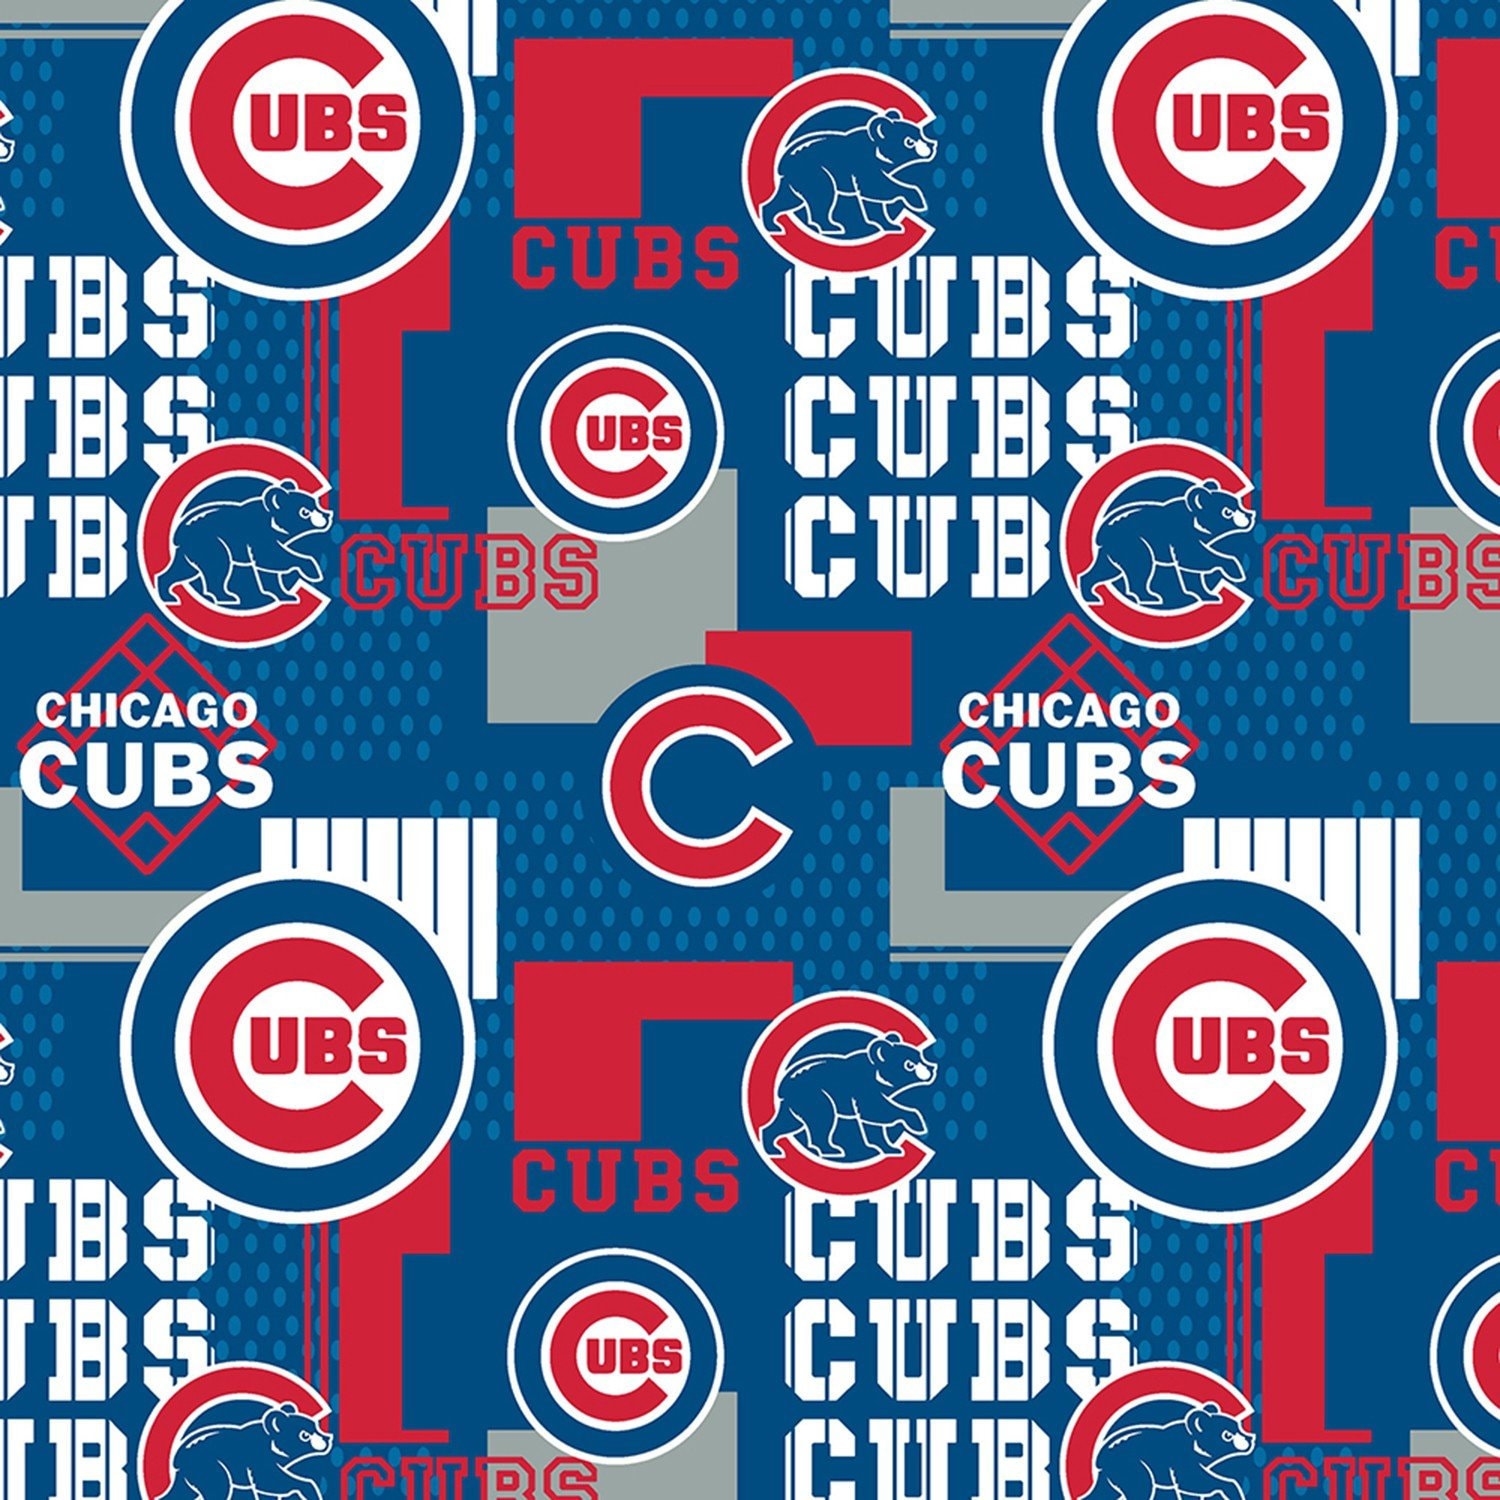 MLB Chicago Cubs Cotton Fabric